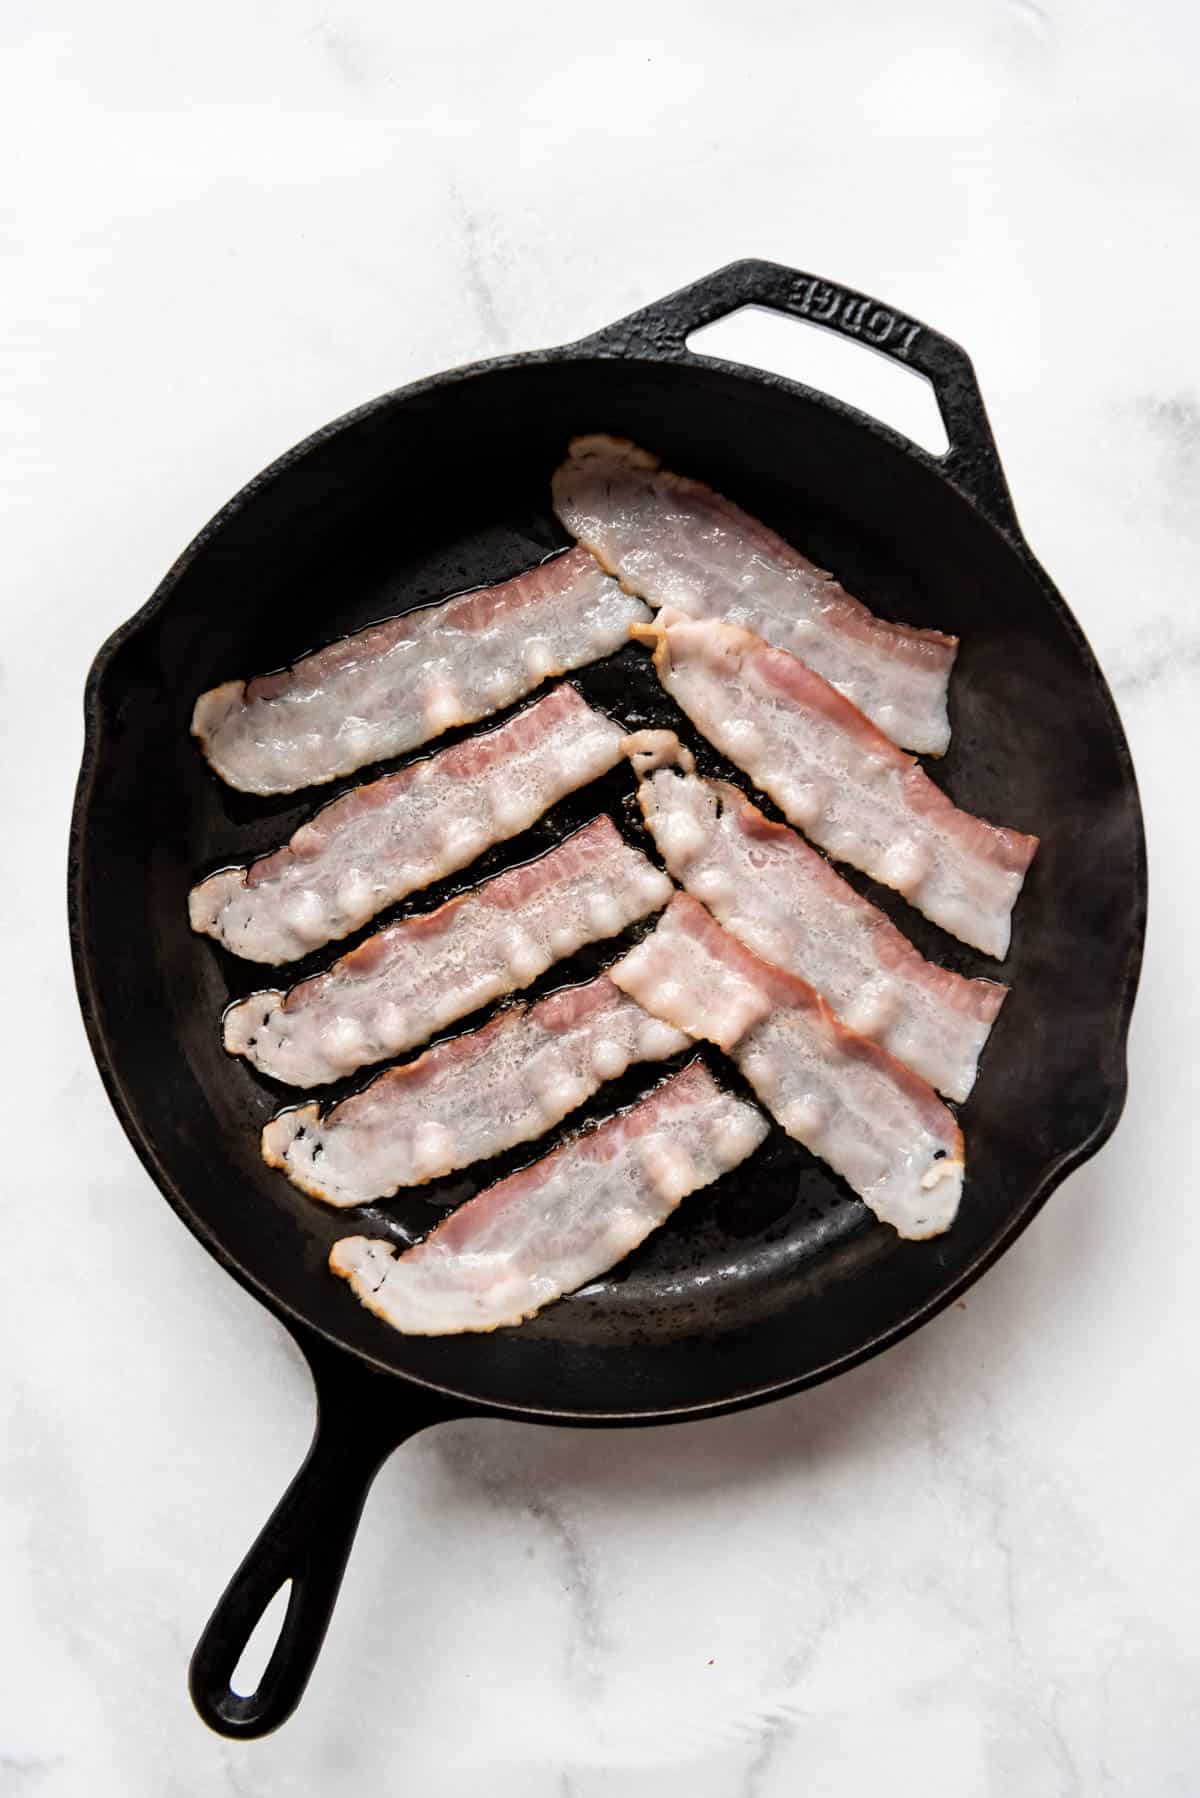 Cooking bacon slices in a cast iron skillet.